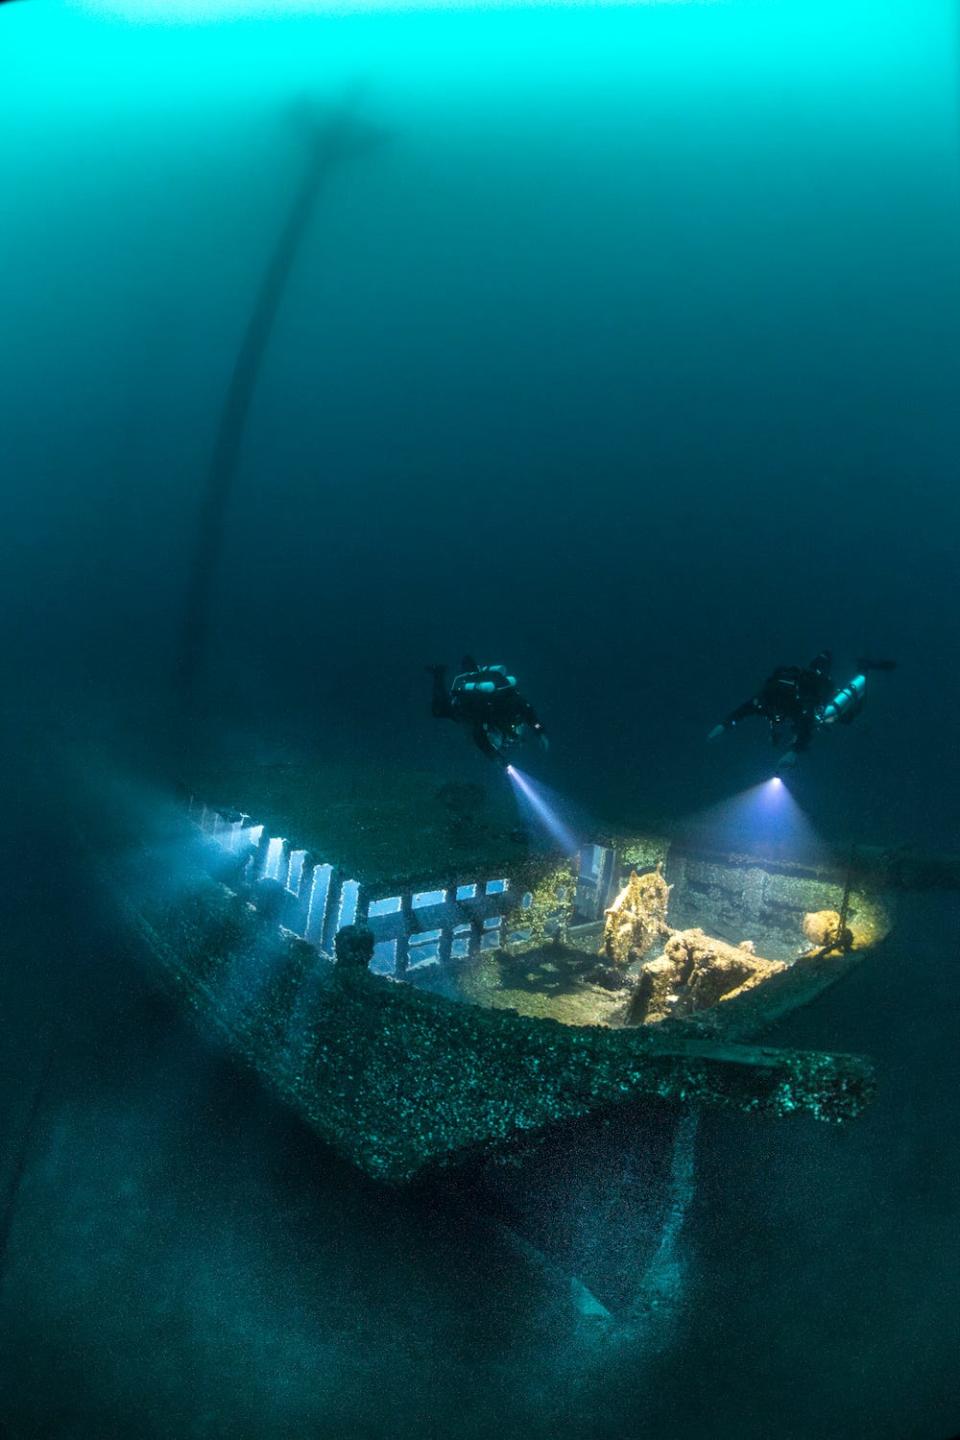 Two divers explore the wreck of the wooden schooner Kyle Spangler in Lake Huron, illuminating its deck with their torches. The image is a winner in the 2024 Underwater Photographer of the Year Awards.